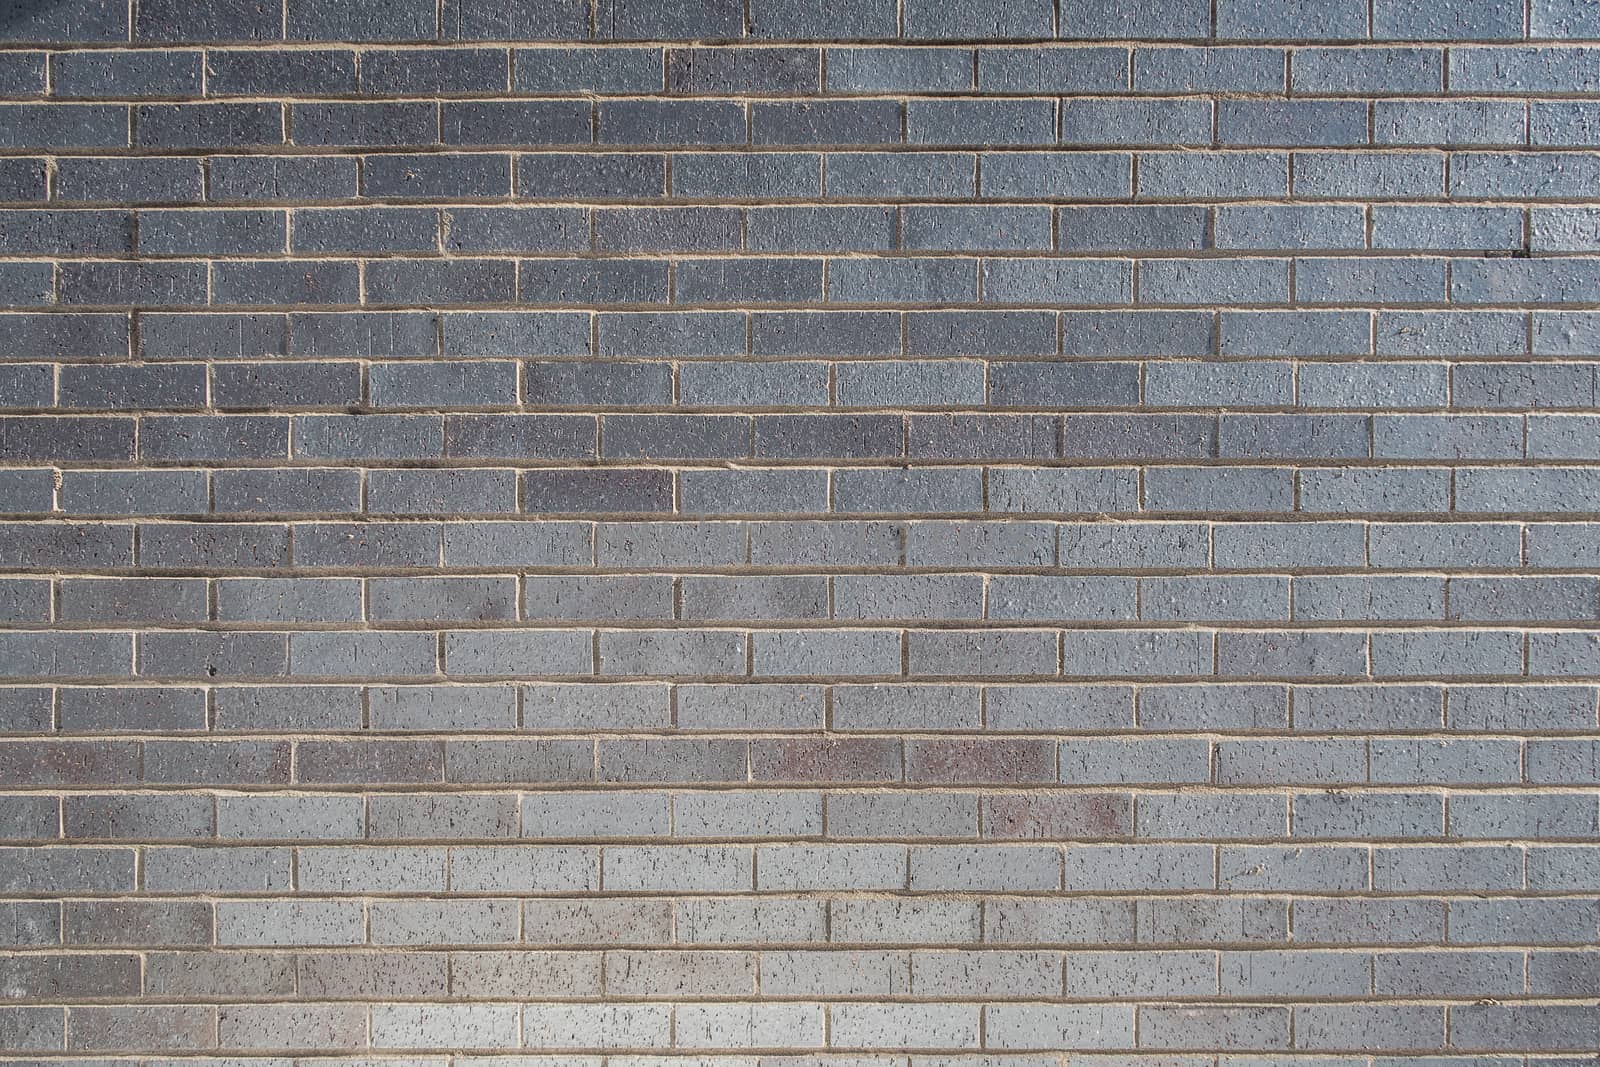 Texture of grey bricks with blue metallic reflects